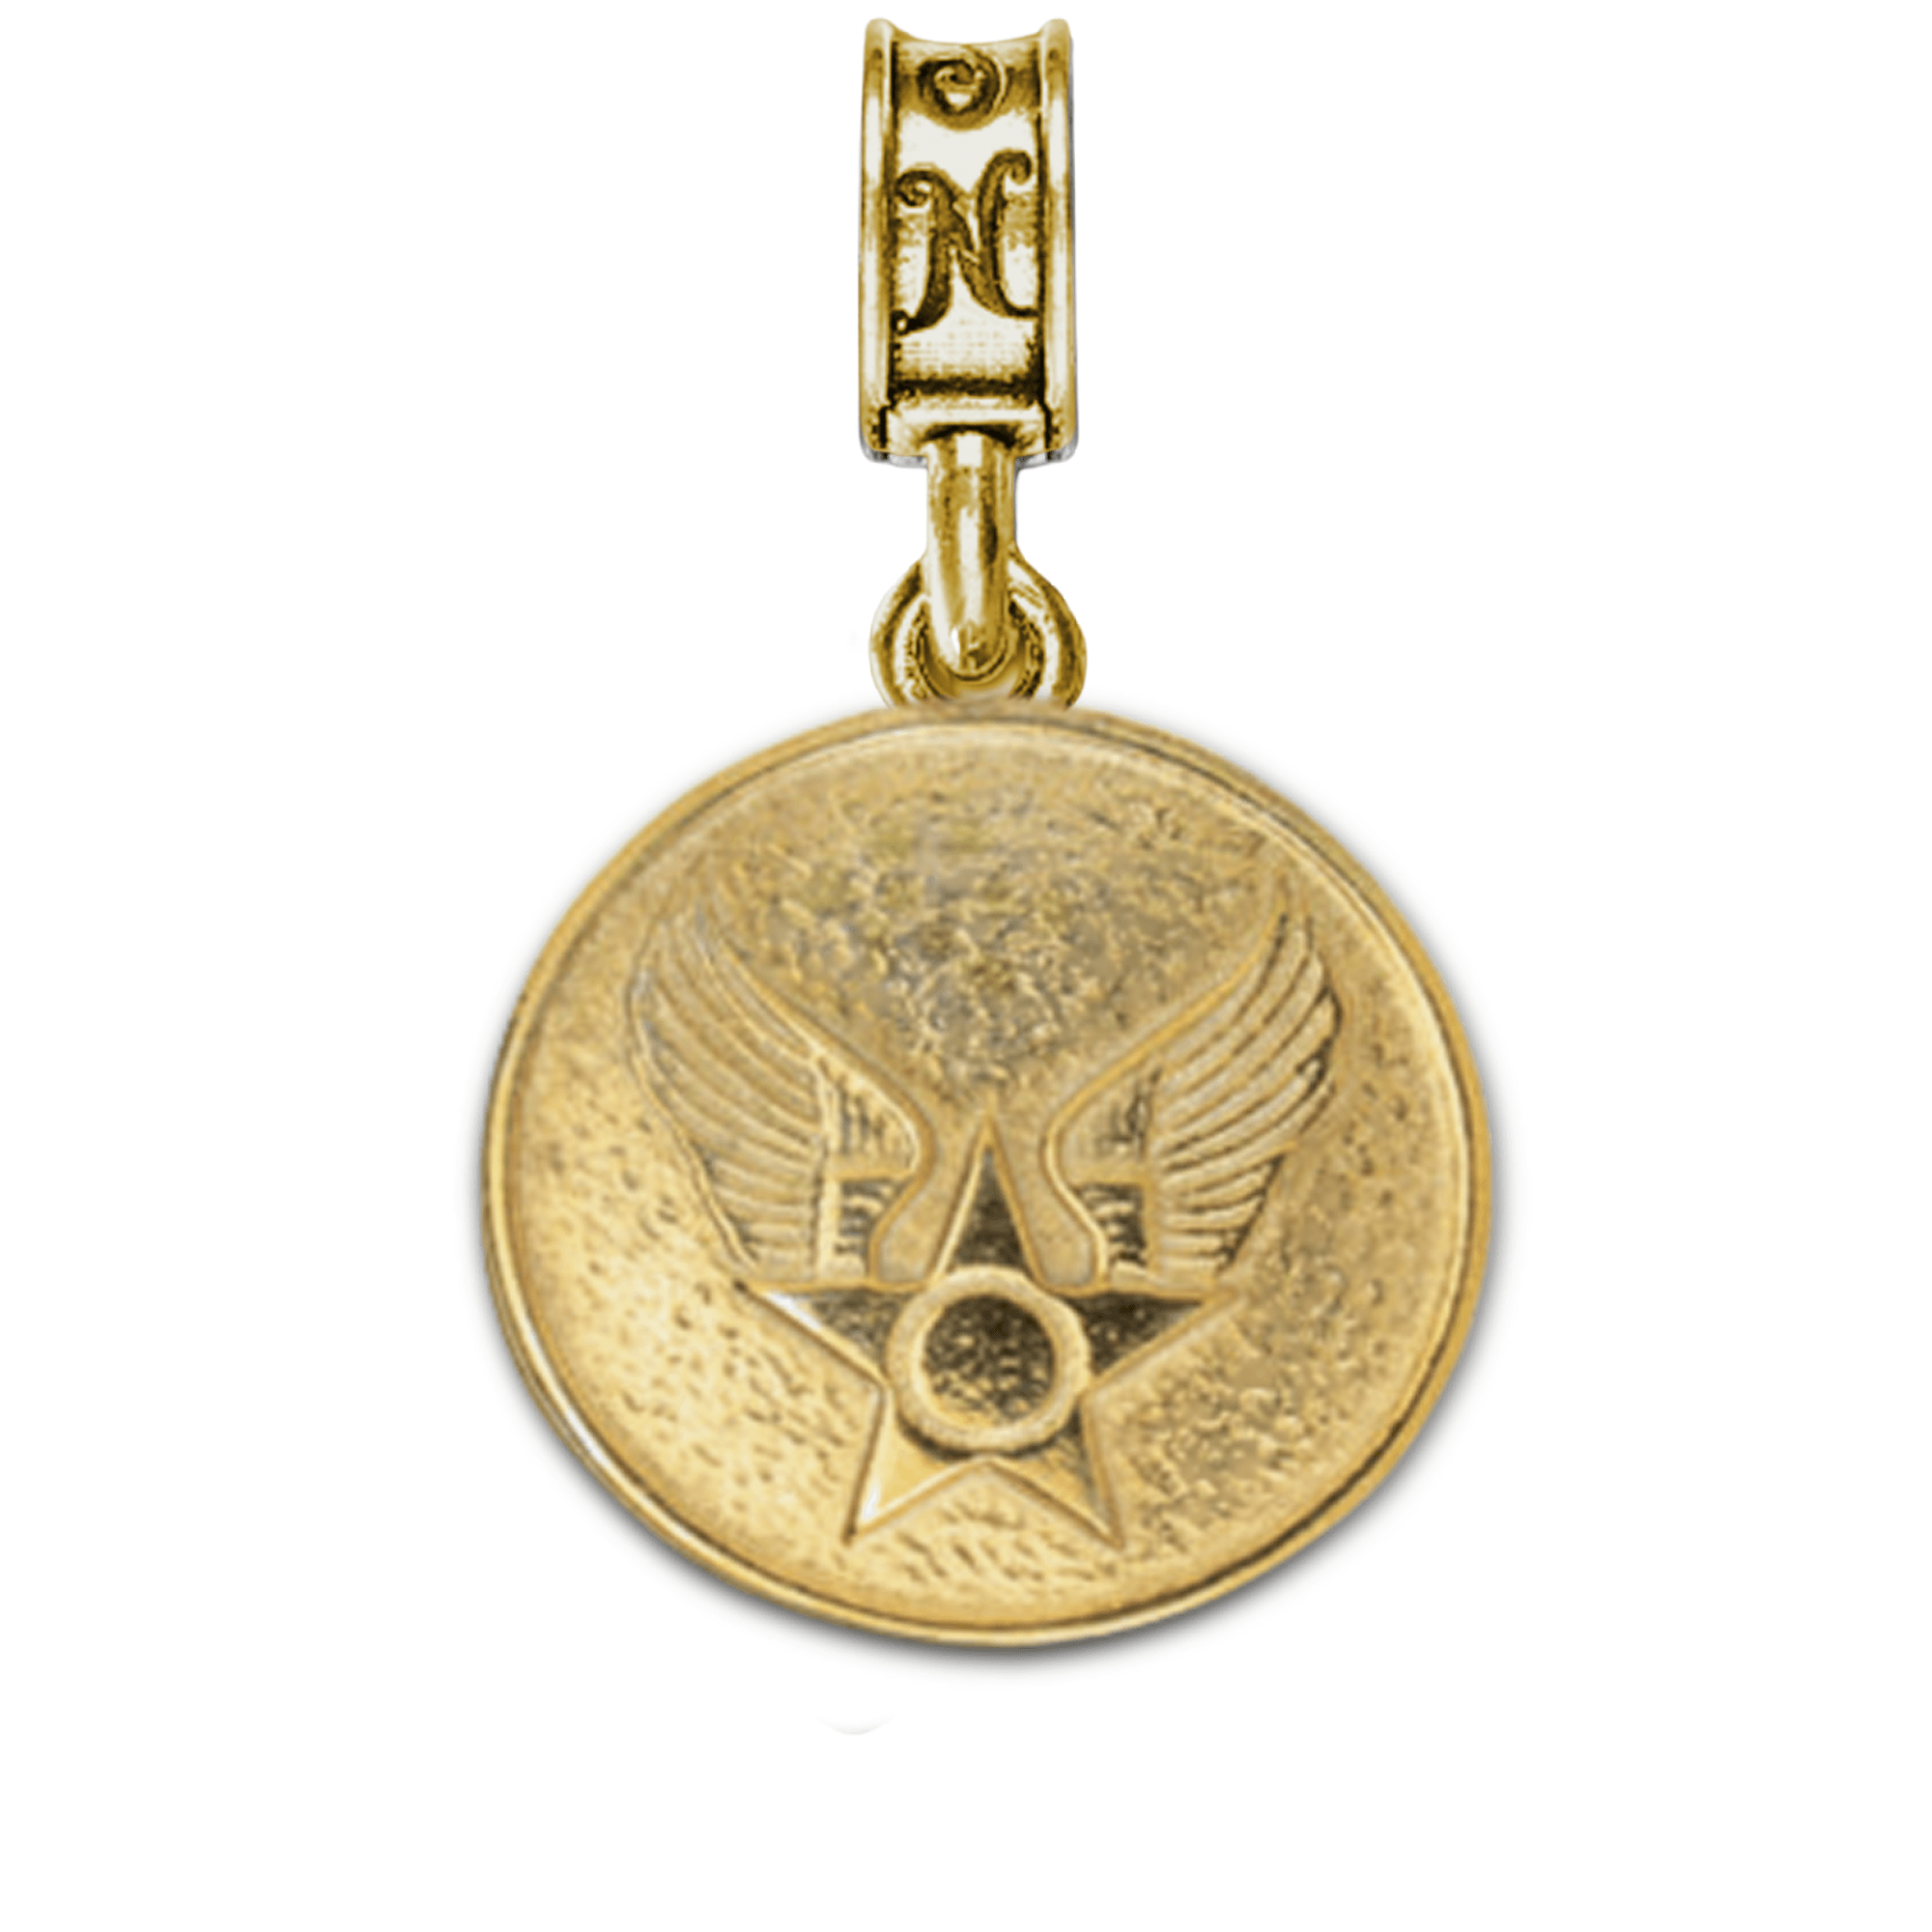 Military Jewelry, Military Charms, Military Gifts, USAF, United States Air Force, Air Force Emblem, USAF Emblem